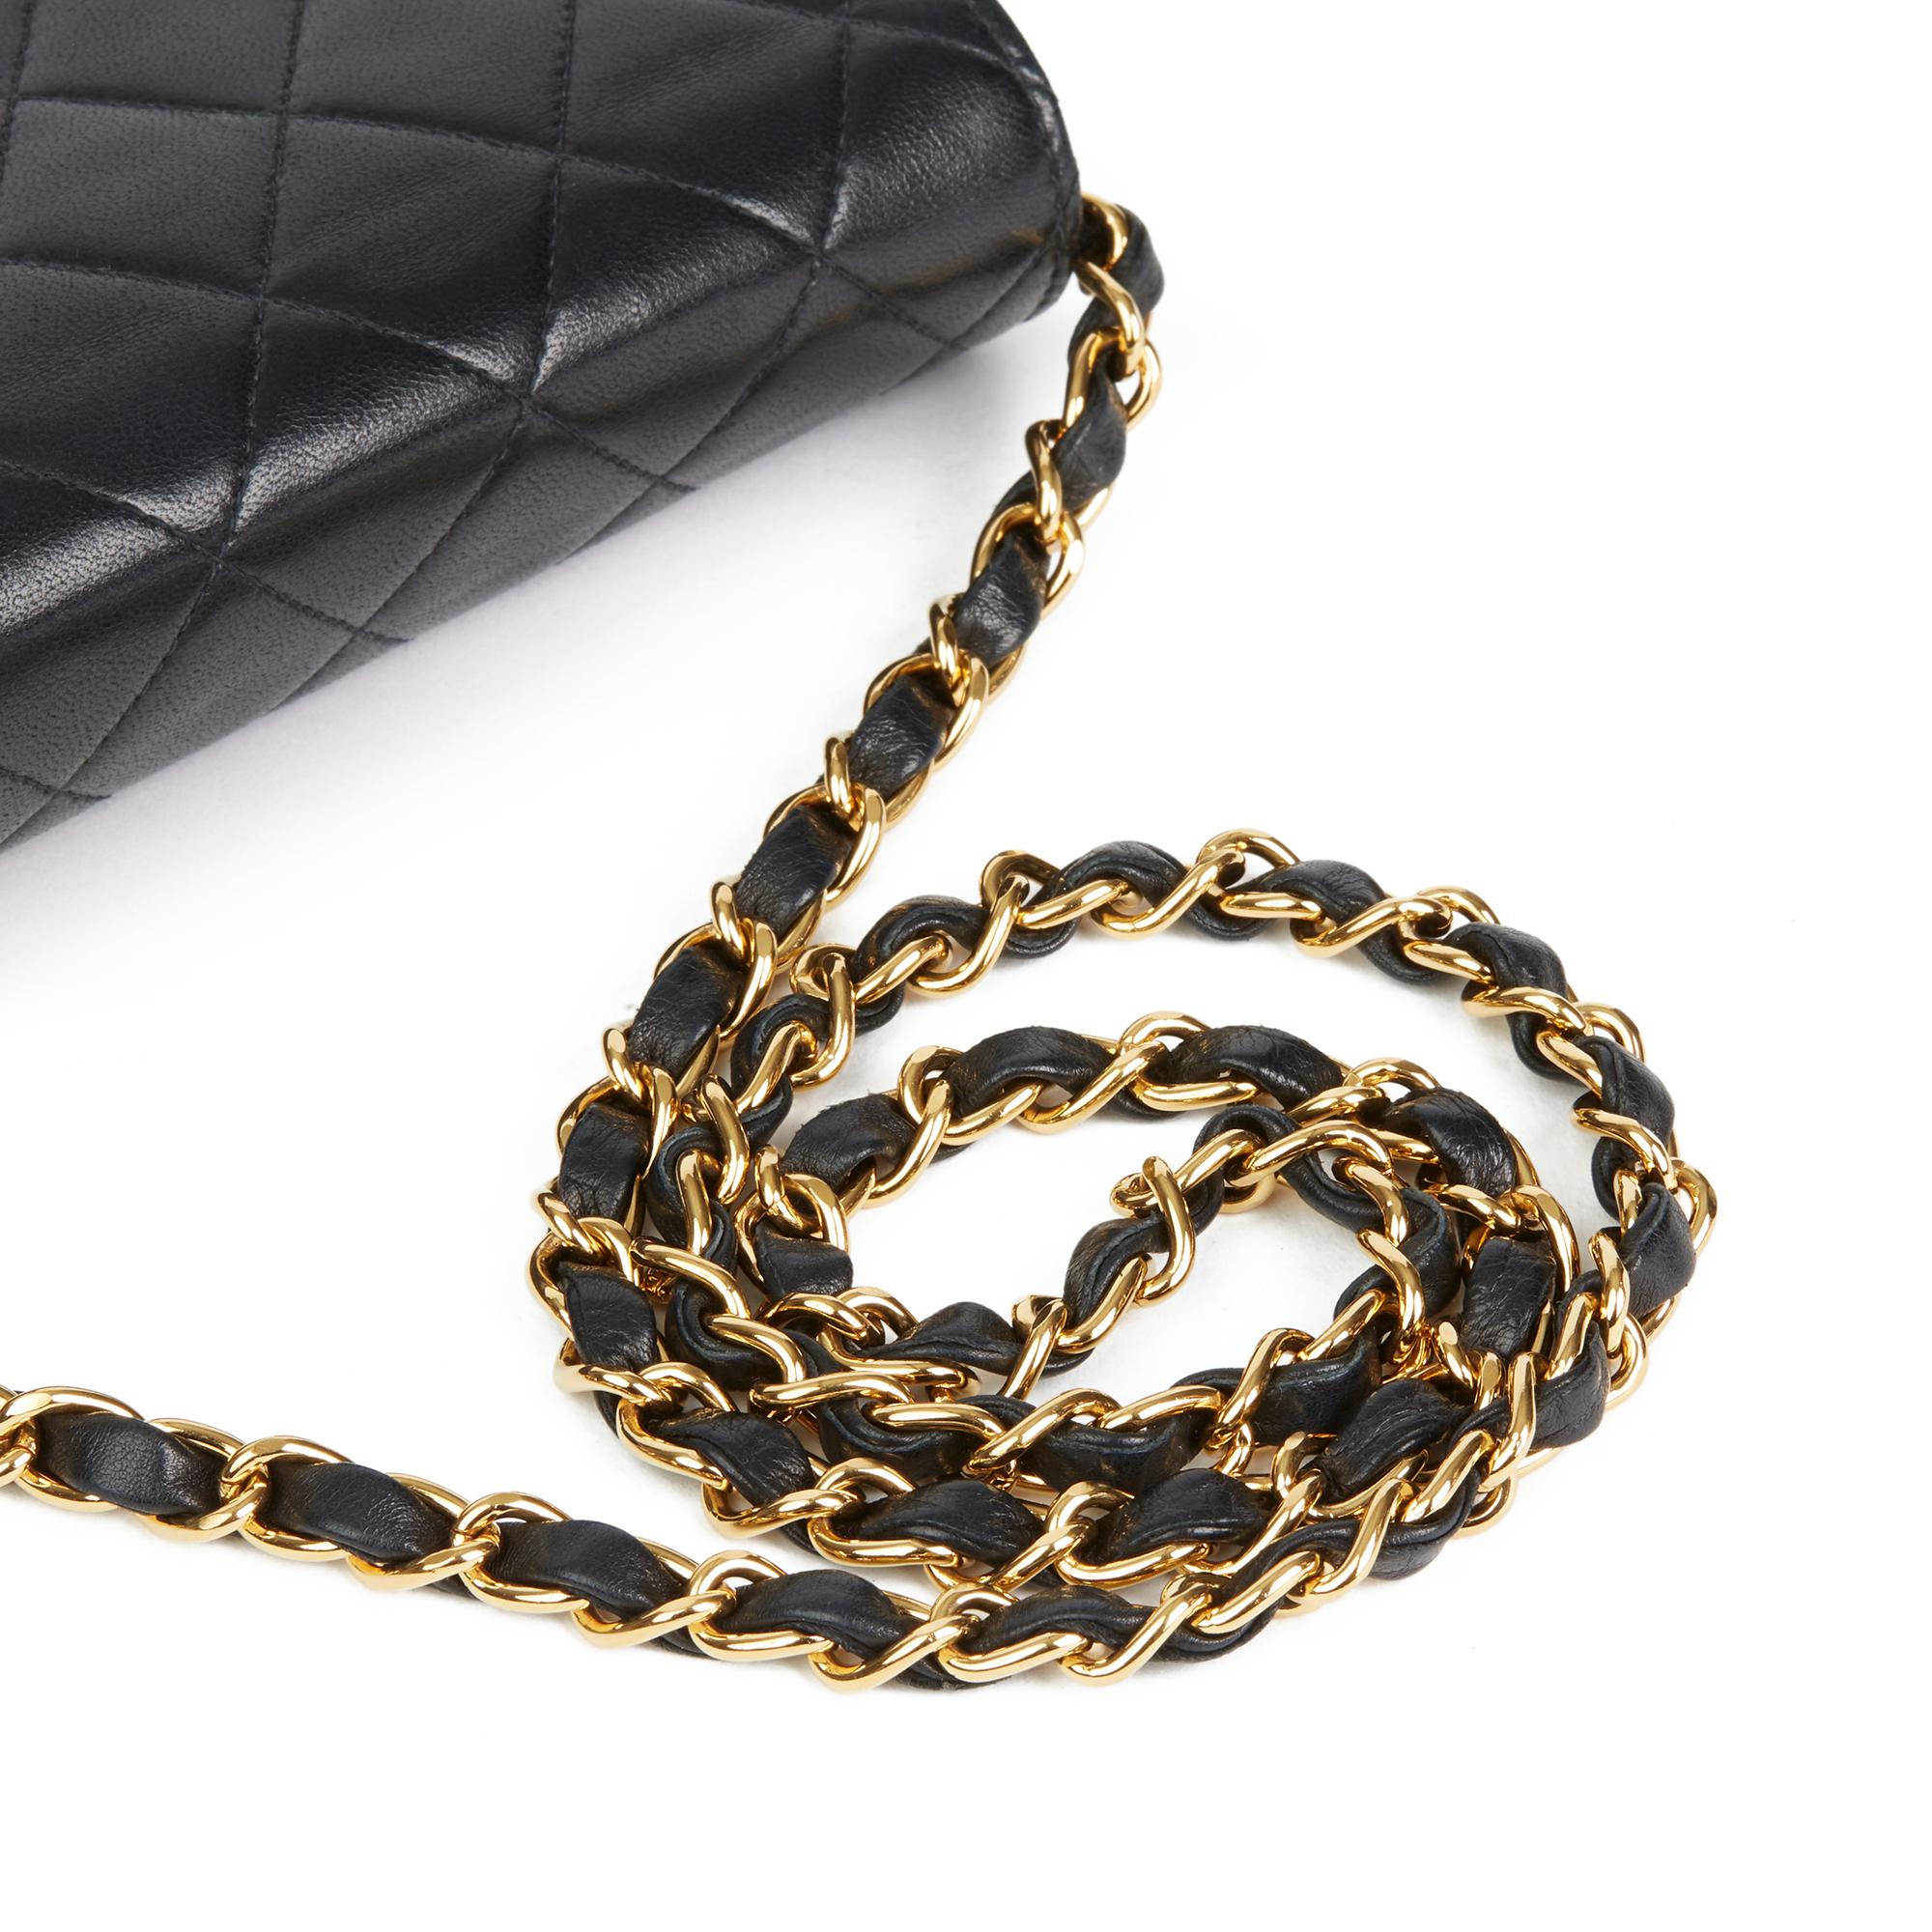 2001 Chanel Black Quilted Lambskin Mini Flap Bag 3